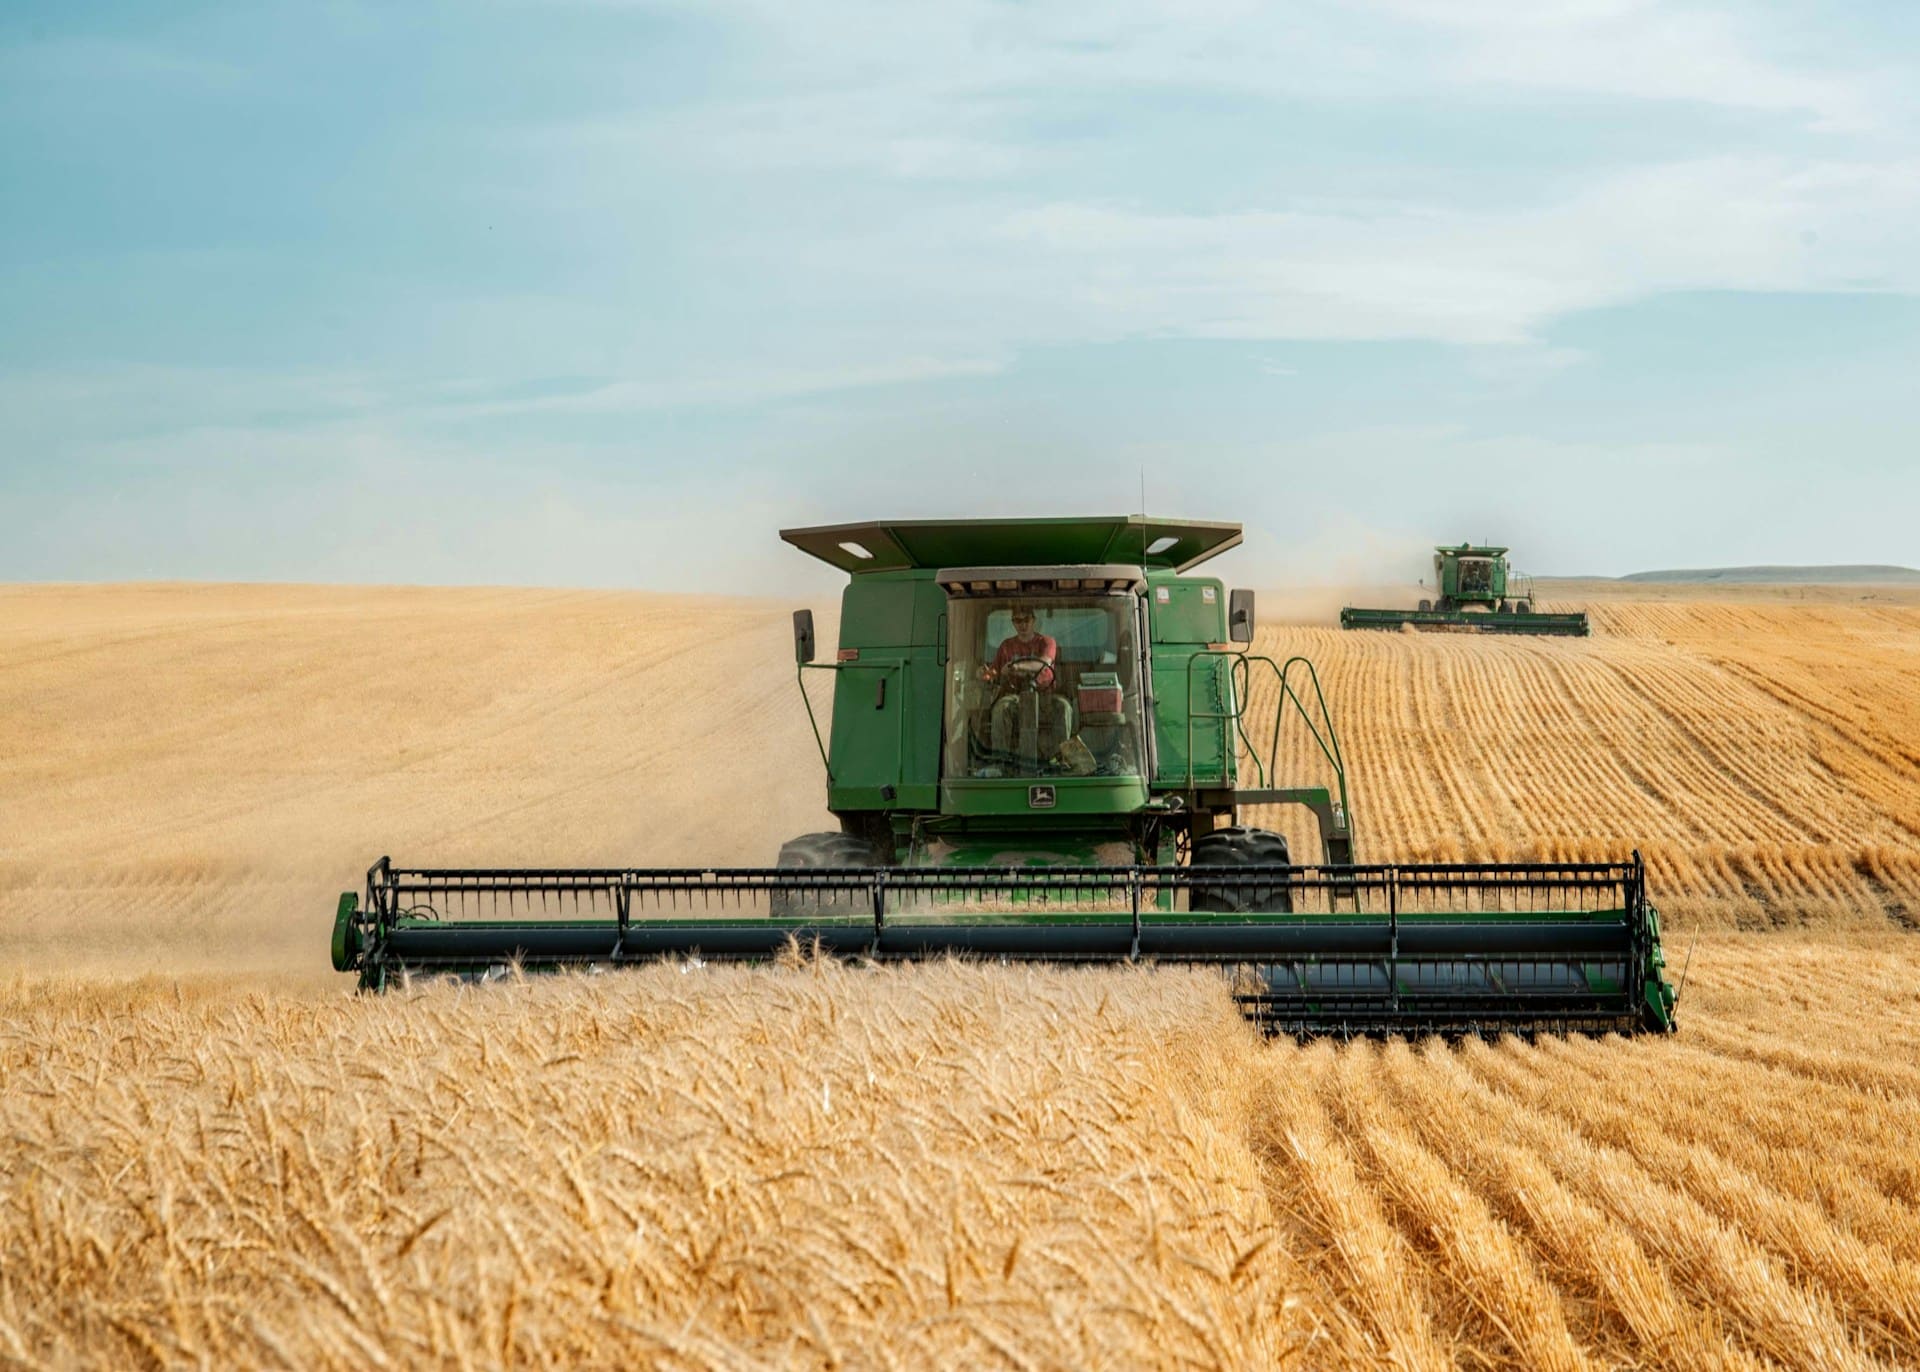 Agriculture and technology combine to drive the industry’s growth